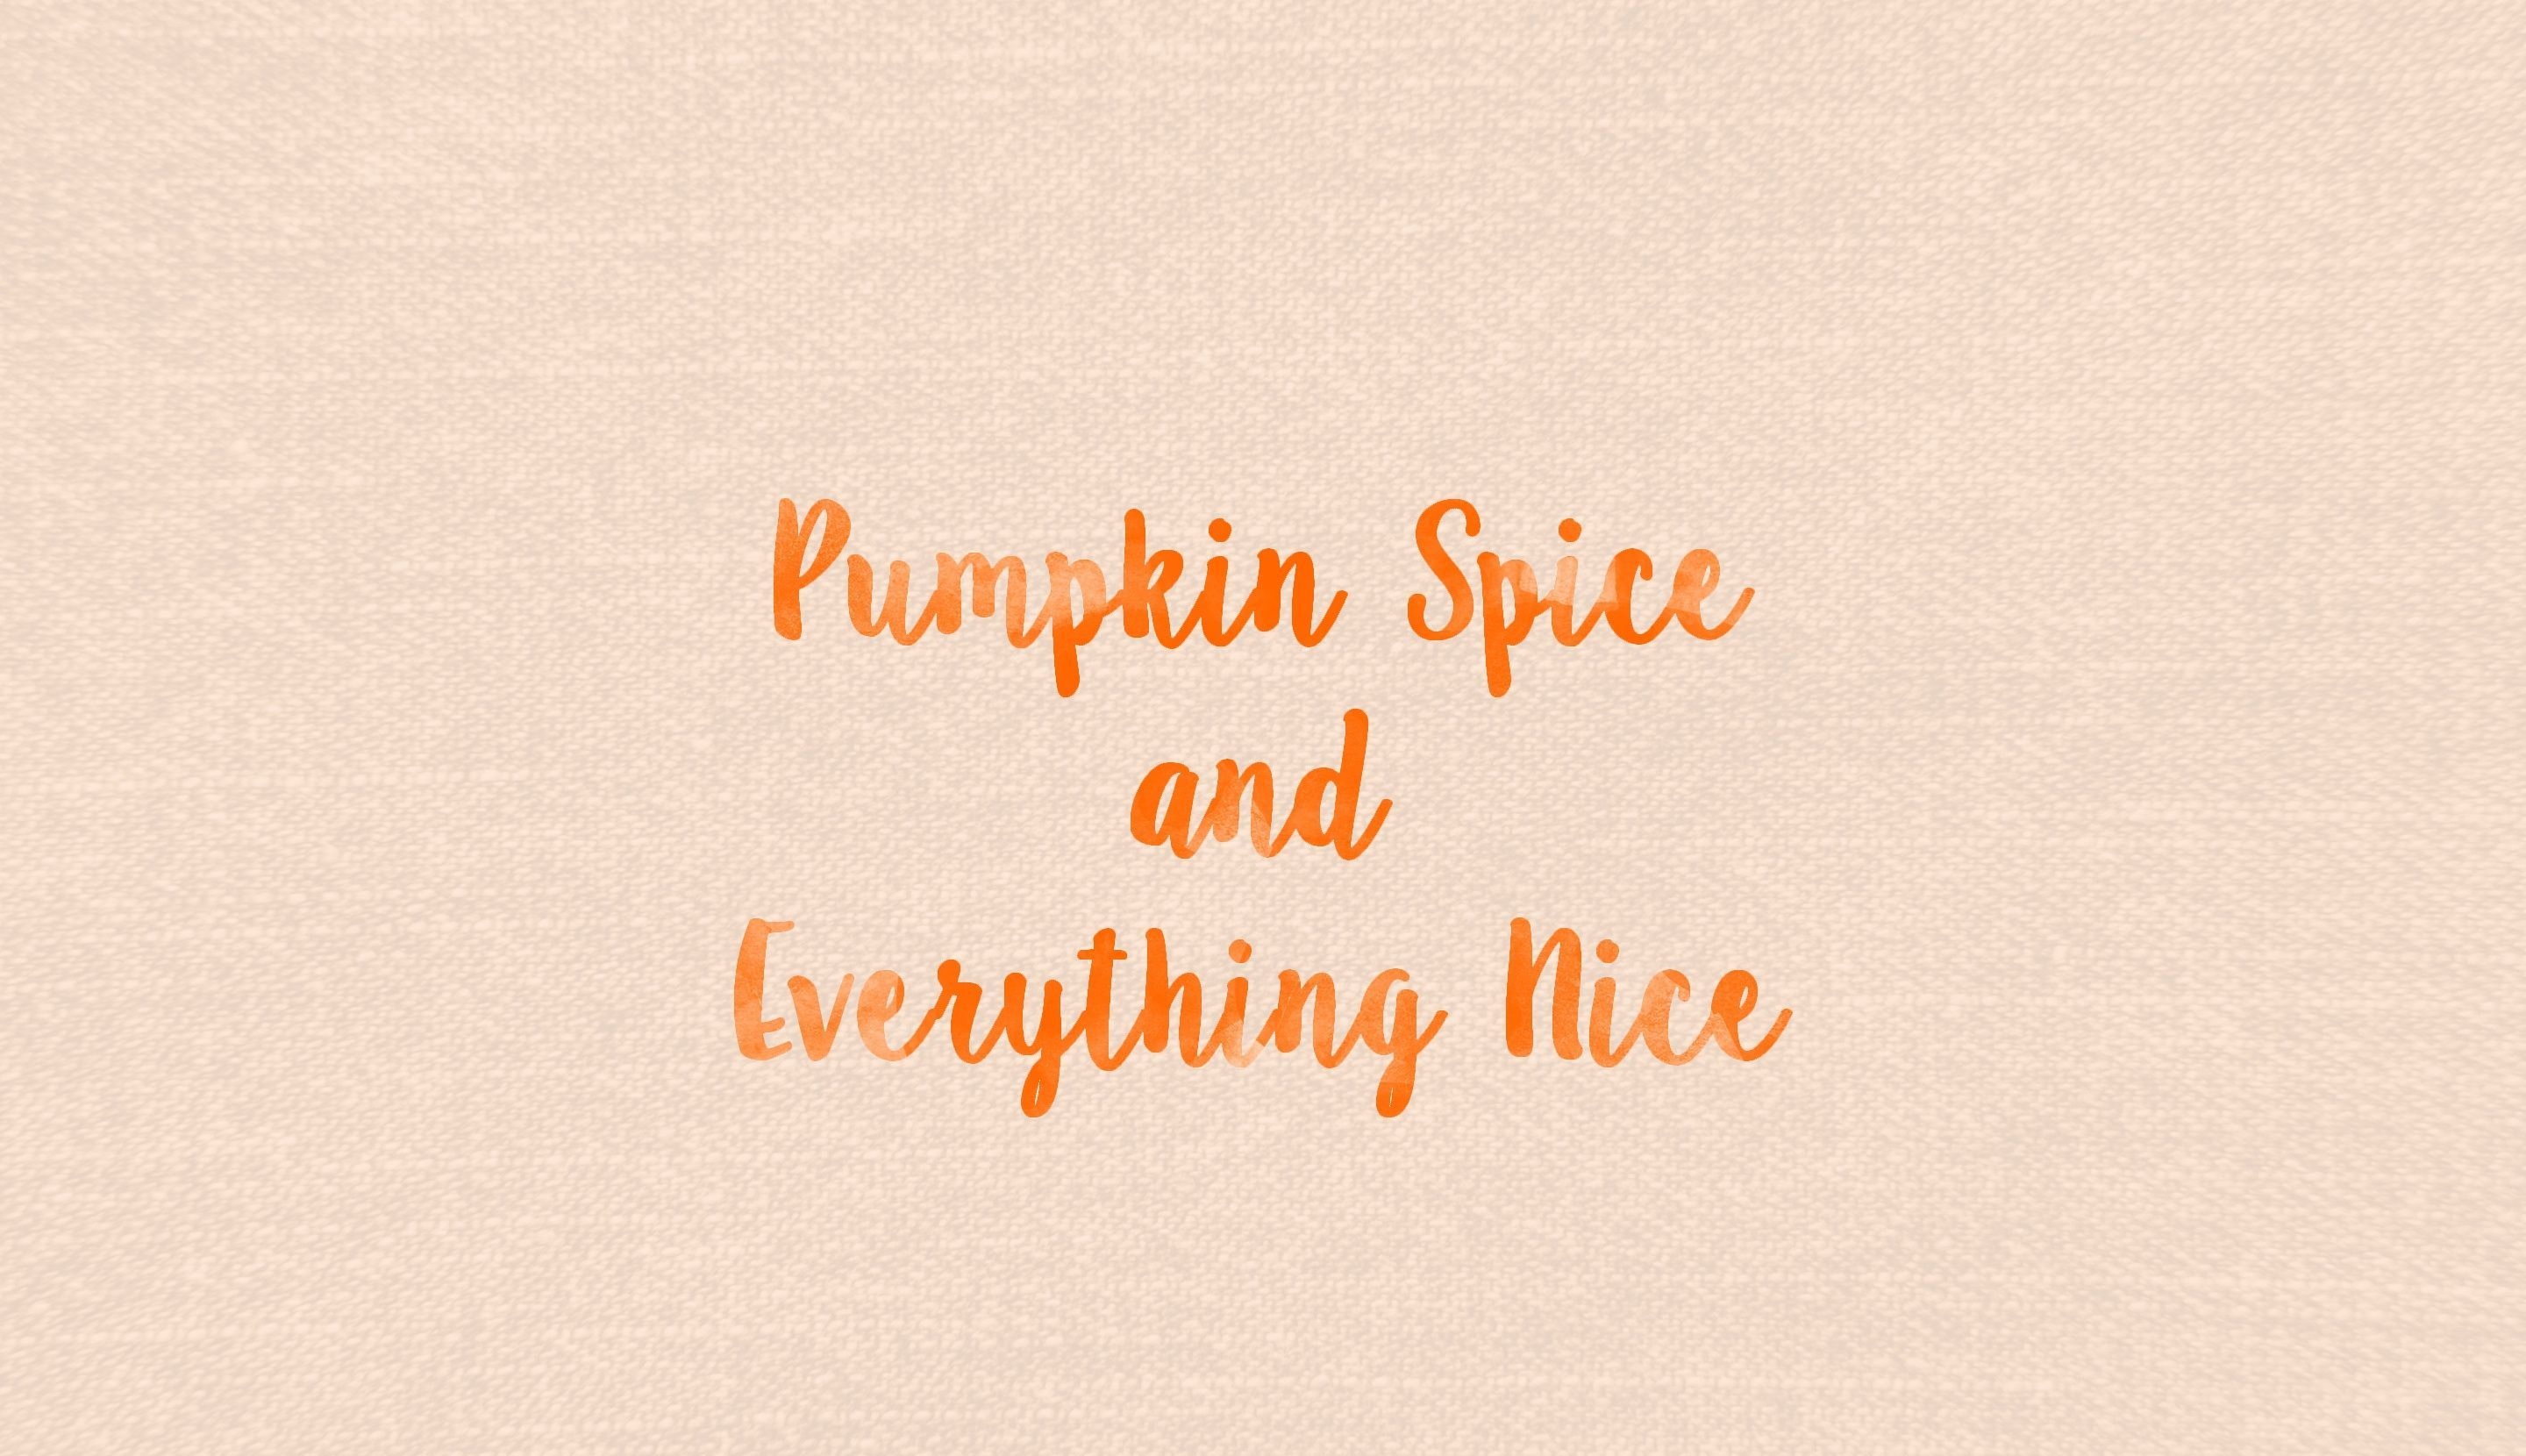 Cute Aesthetic AutumnWallpapers